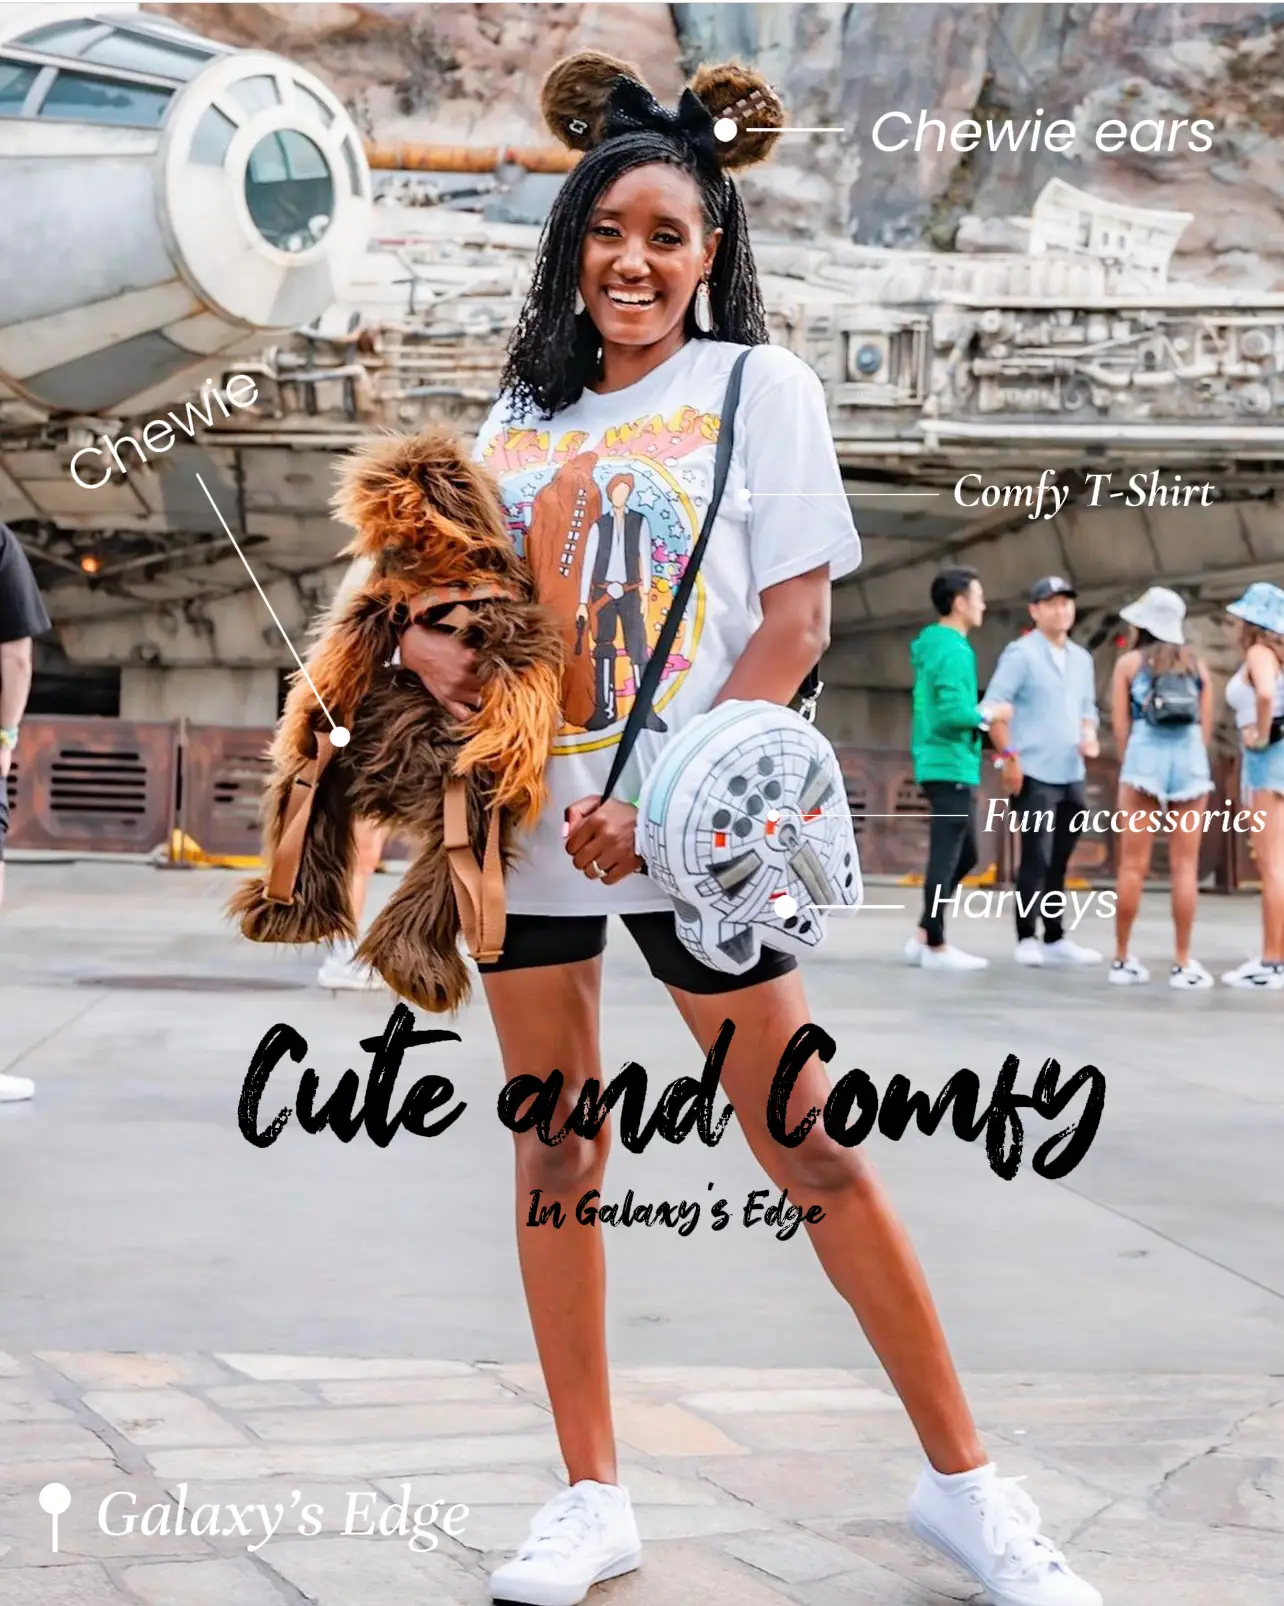 6 OUTFIT IDEAS FOR STAR WARS DAY (May 4th)